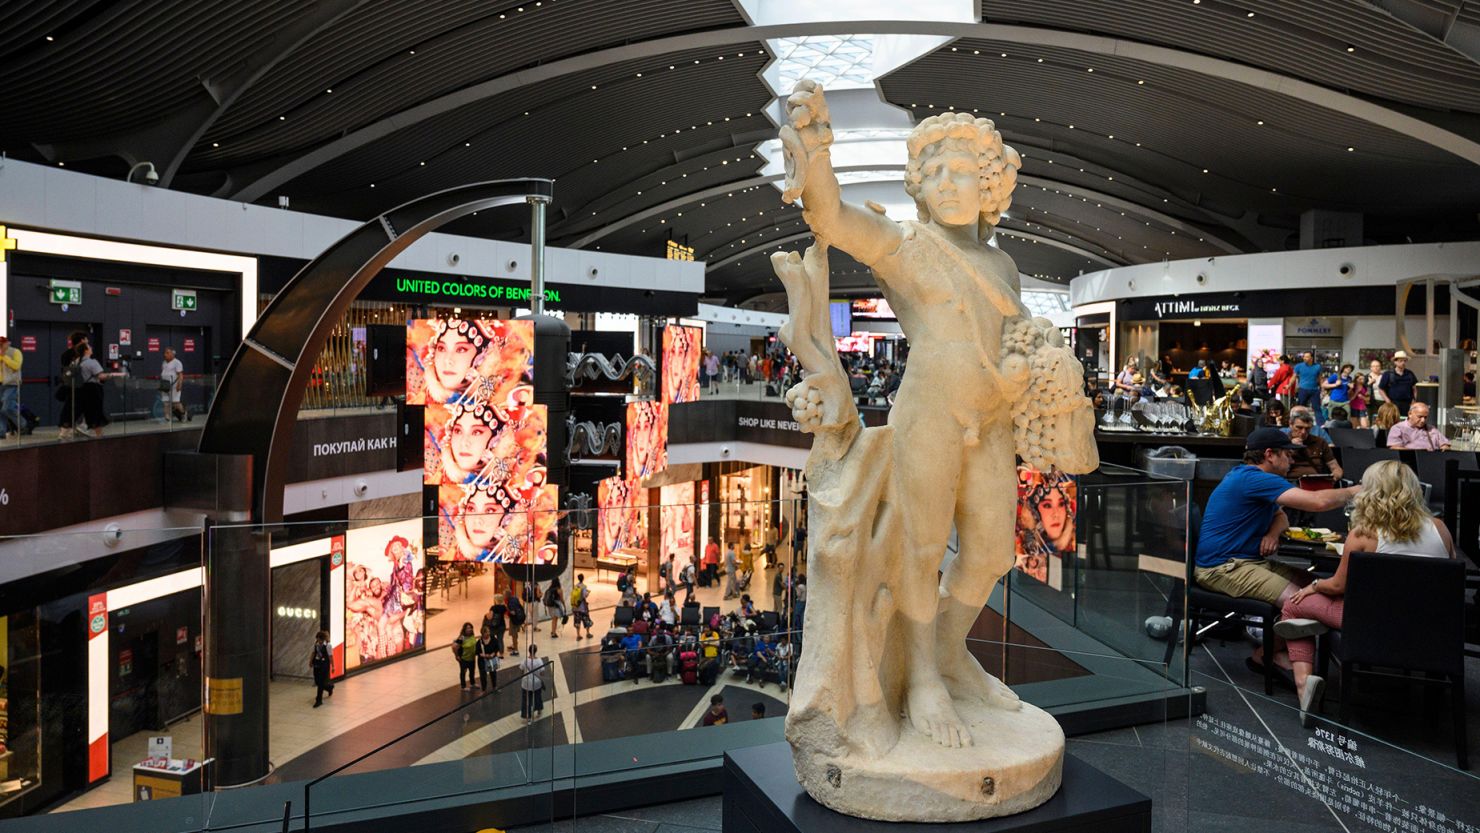 Rome Fiumicino is one of the world's most loved airports.